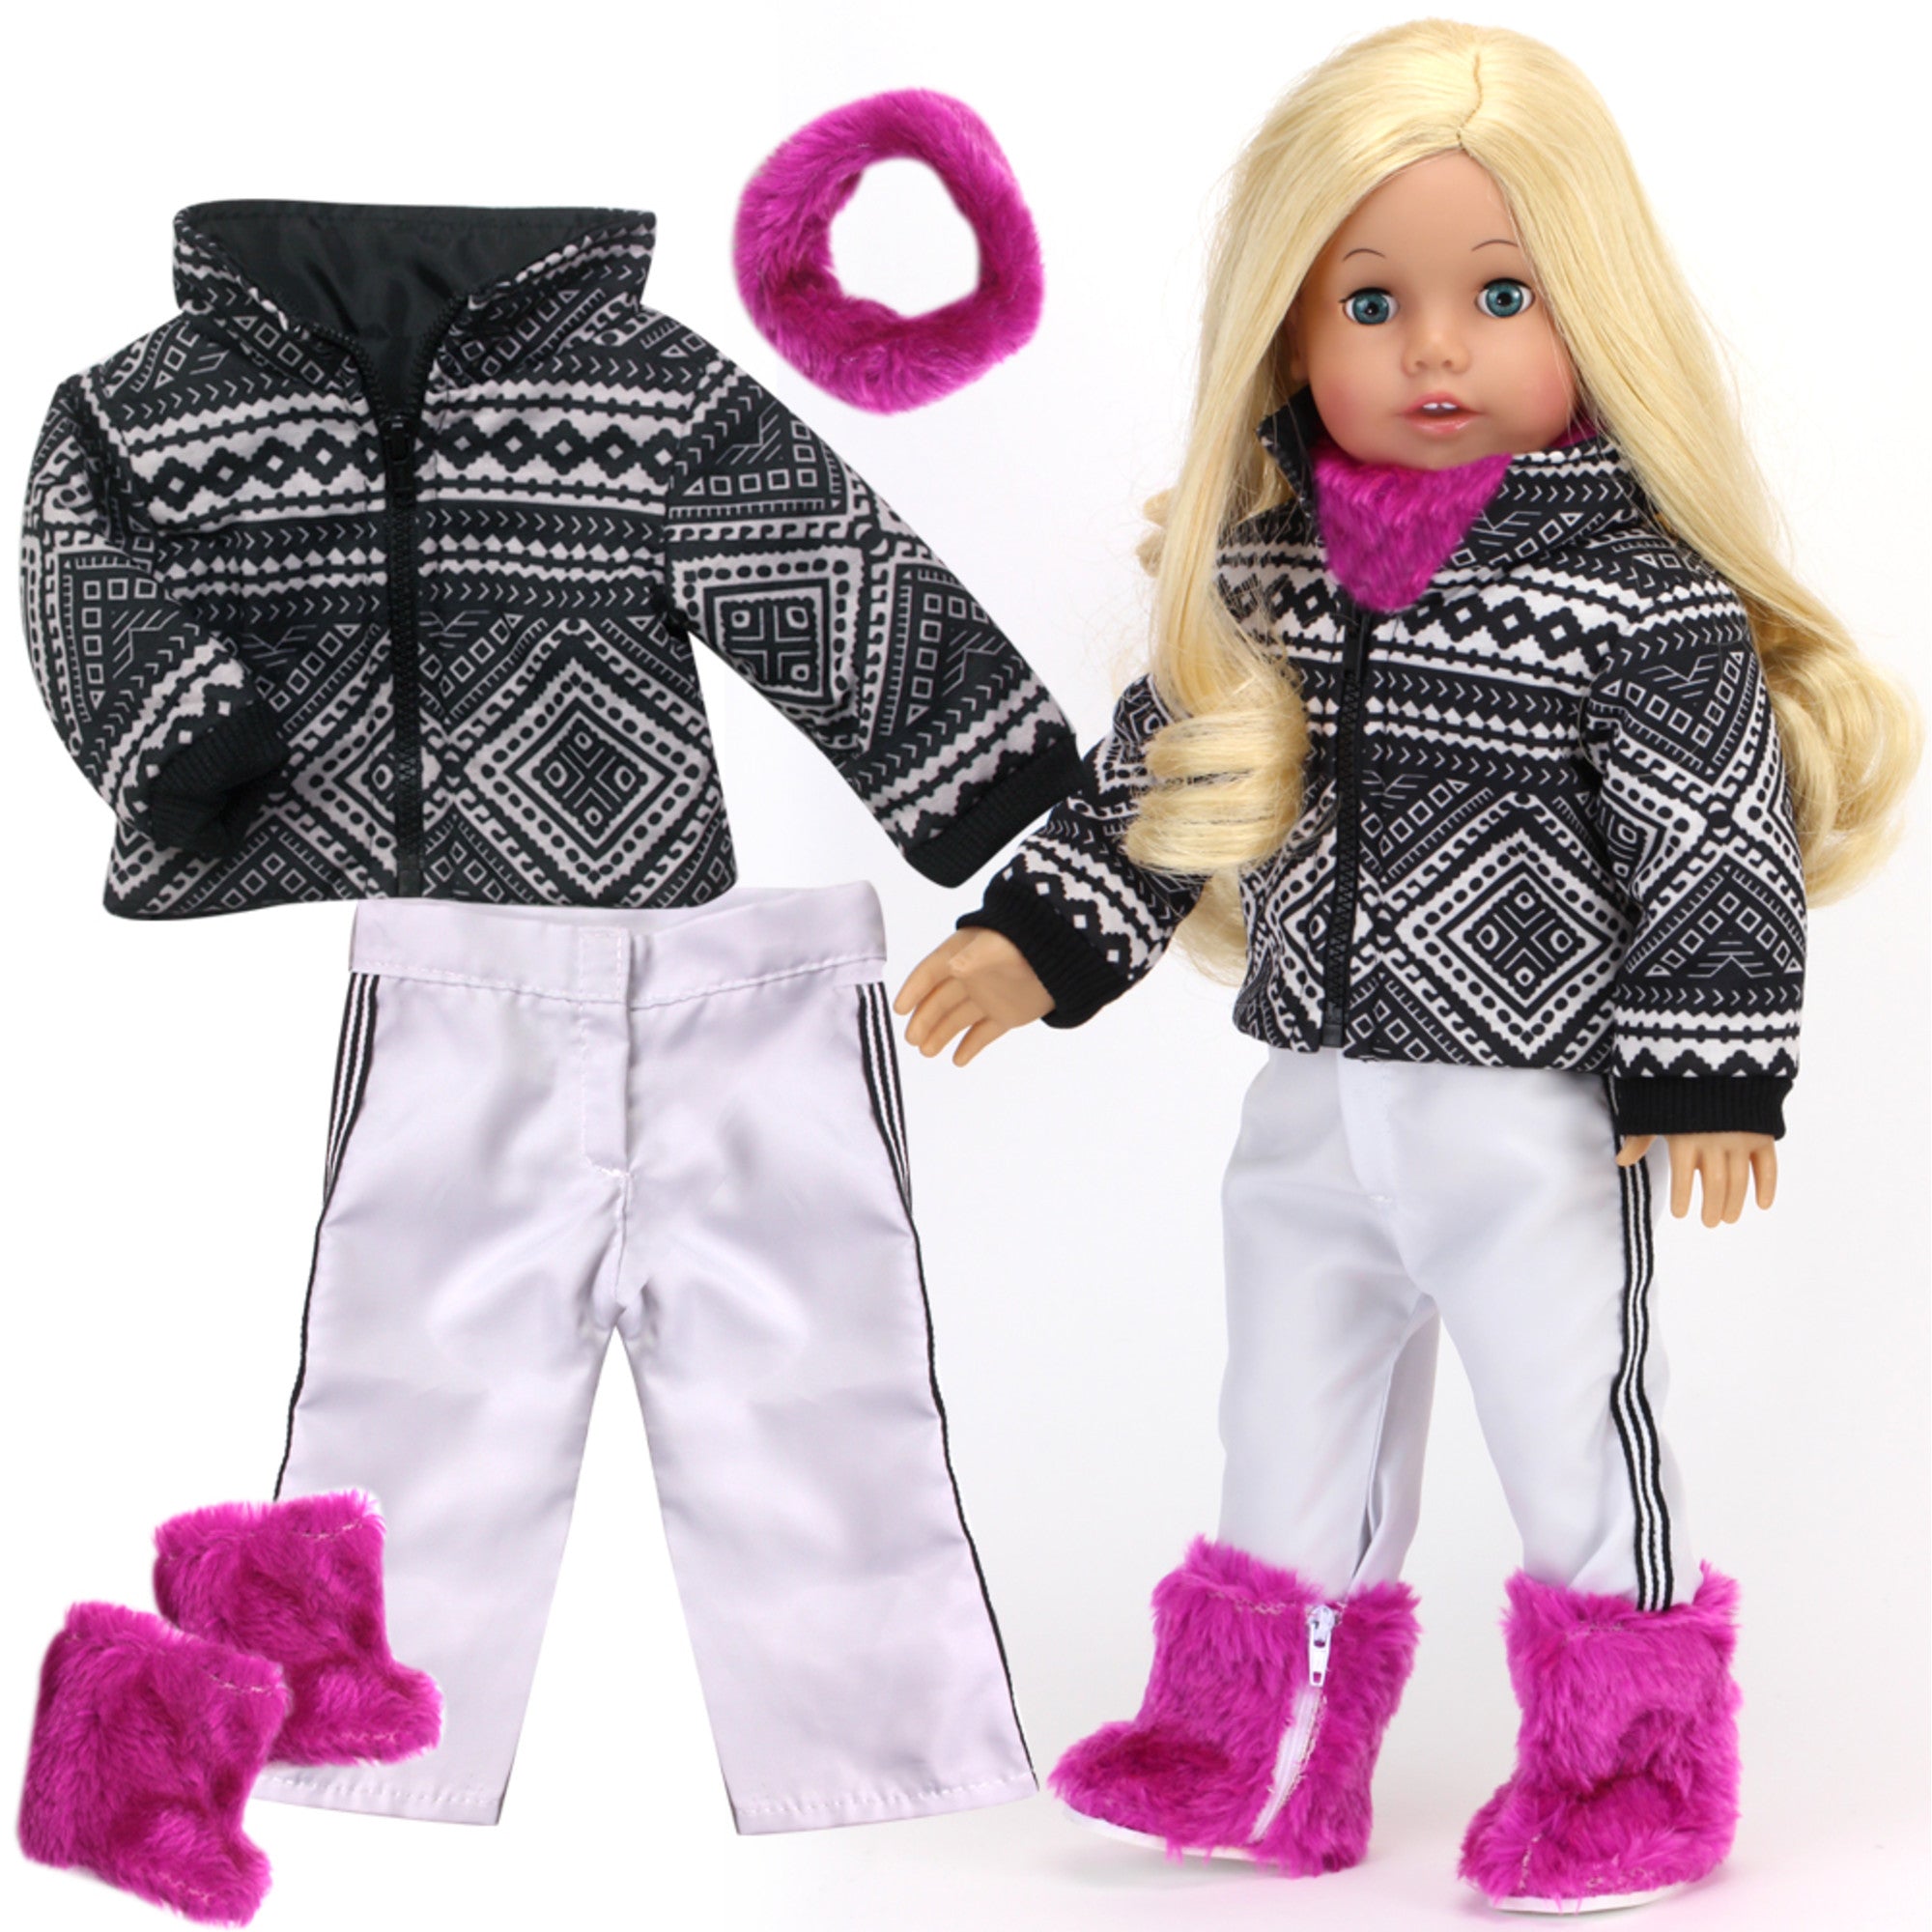 Sophia’s Mix & Match Ikat-Inspired Print Ski Coat, White Pants, Fuzzy Neck Warmer, & Matching Boots Winter Sports Outfit Set for 18” Dolls, Black/Berry